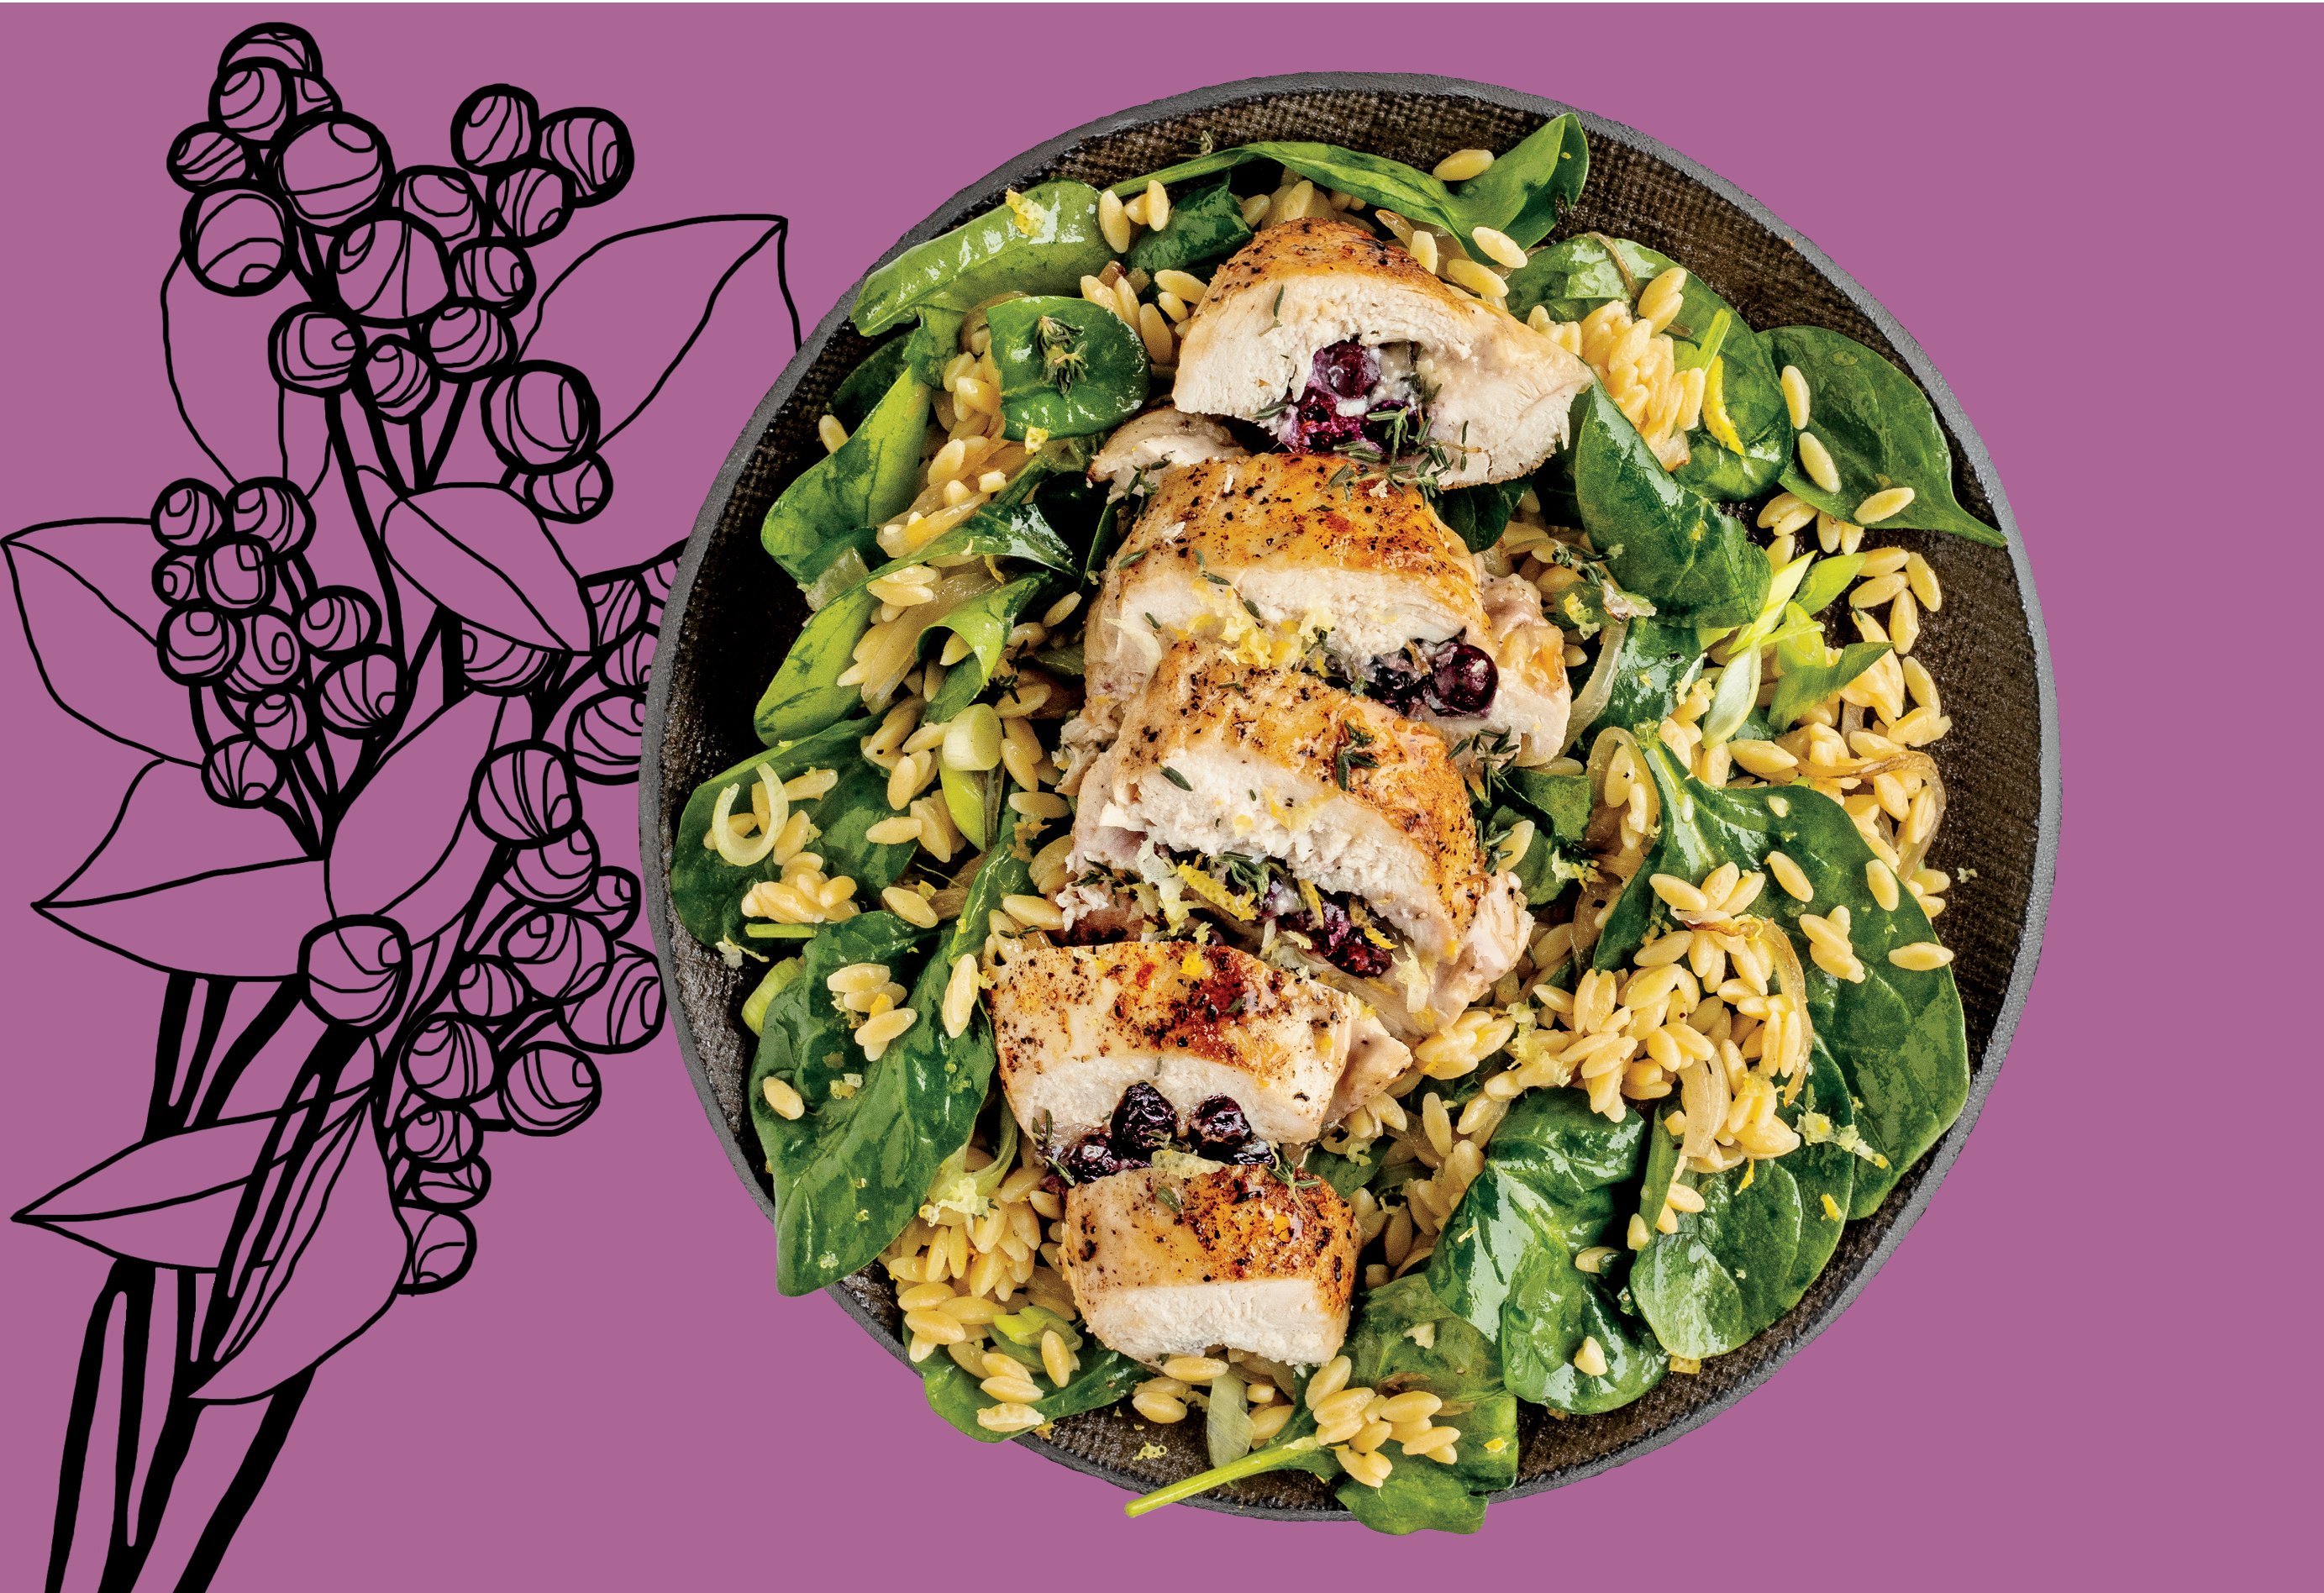 Saskatoon Berry and Brie Stuffed Chicken Breast over Orzo Spinach Salad by Christa Bruneau-Guenther